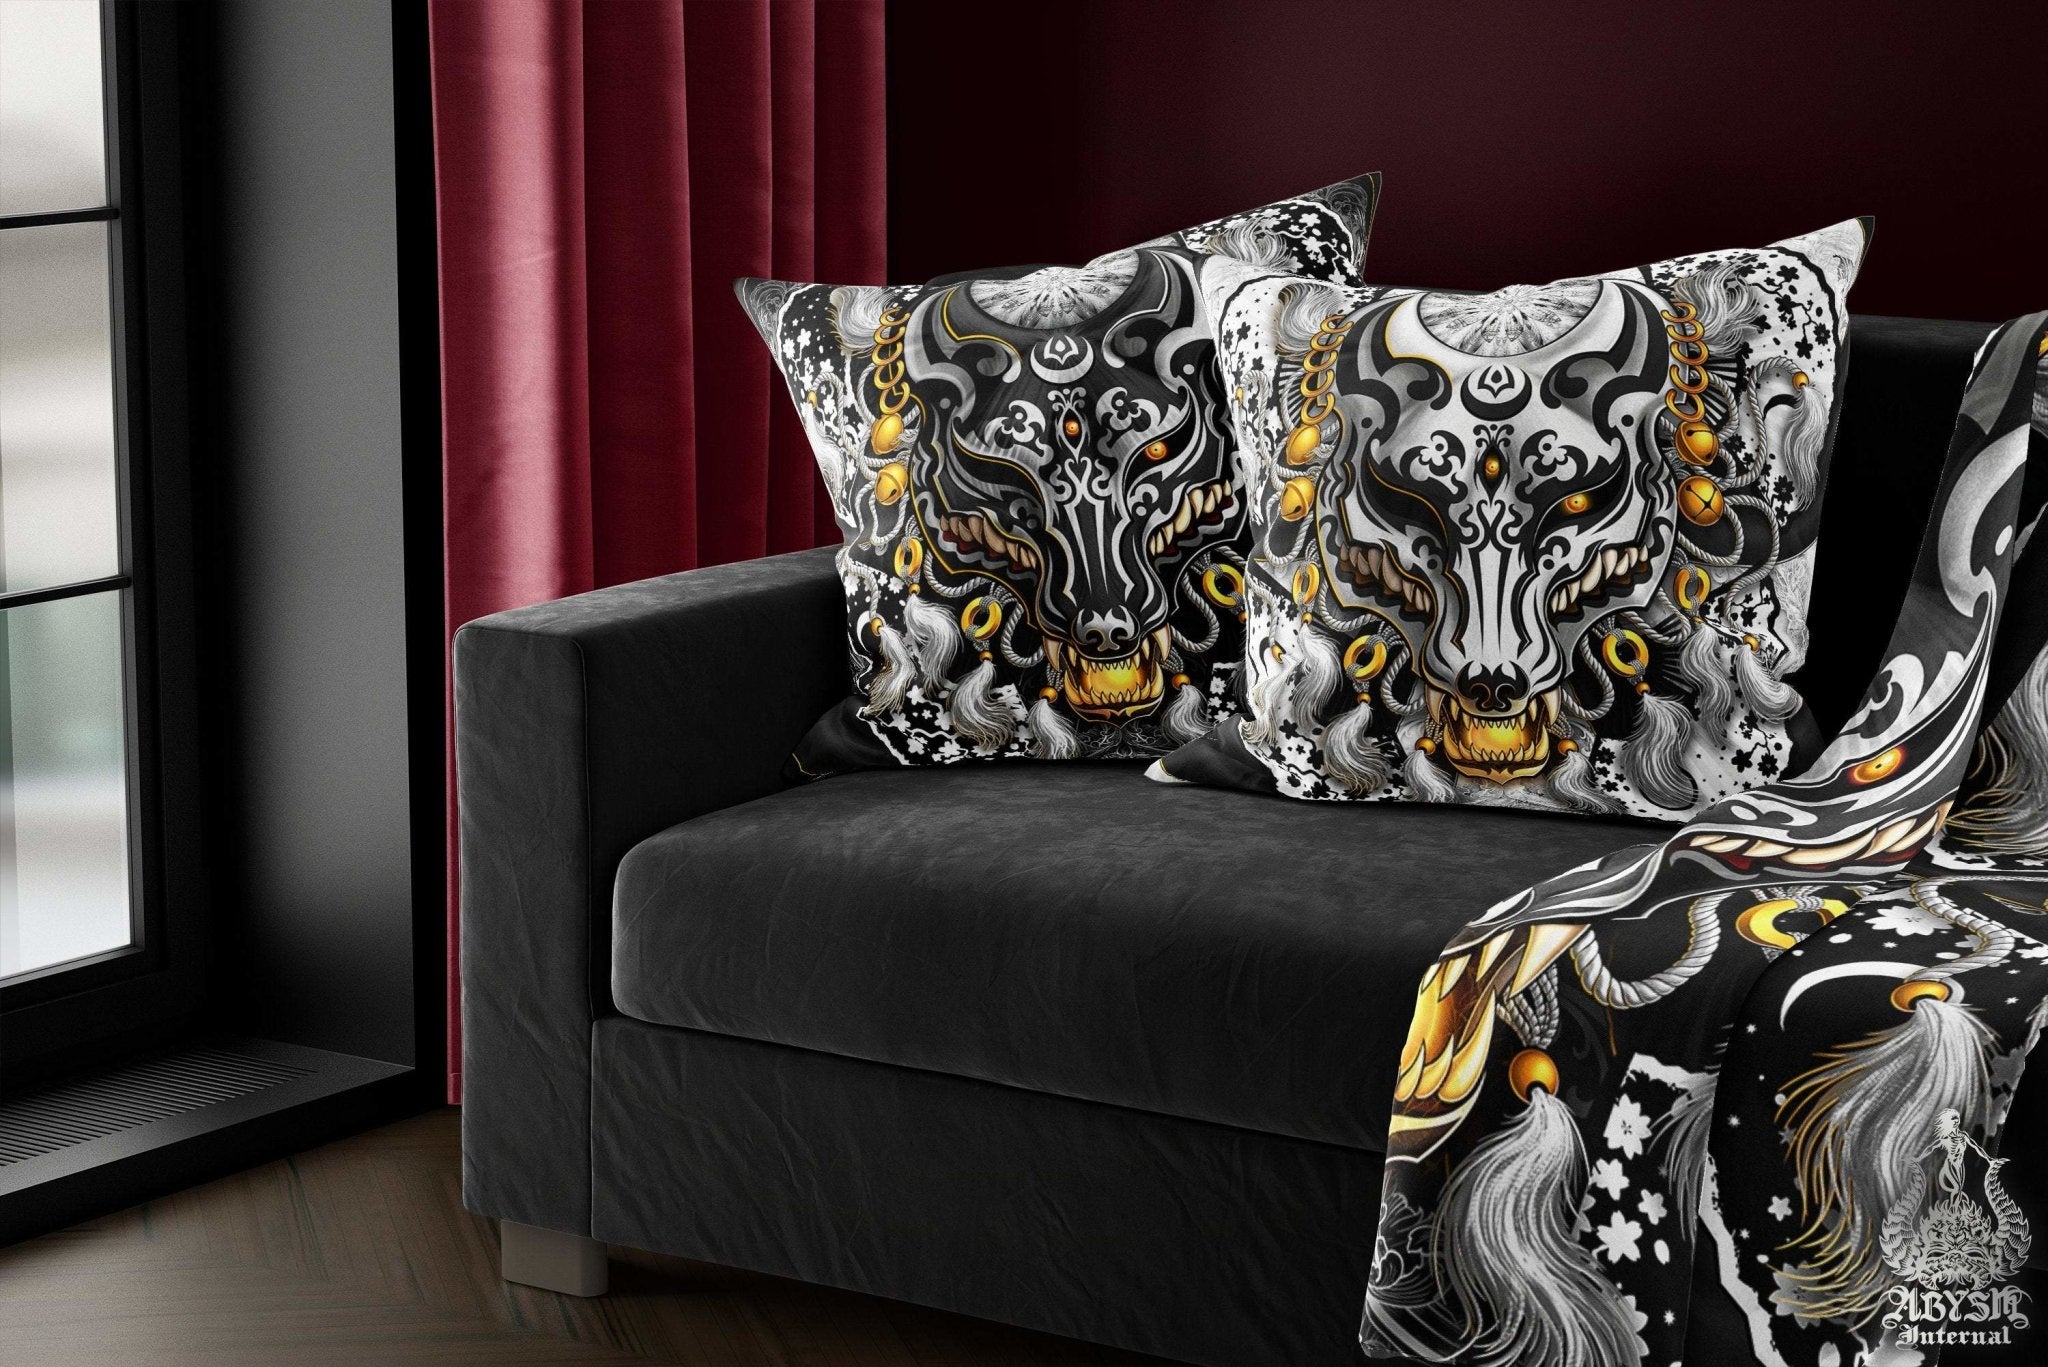 Kitsune Throw Pillow, Decorative Accent Cushion, Japanese Fox Mask, Okami, Anime and Gamer Room Decor, Alternative Home, Funky and Eclectic - Black & White - Abysm Internal